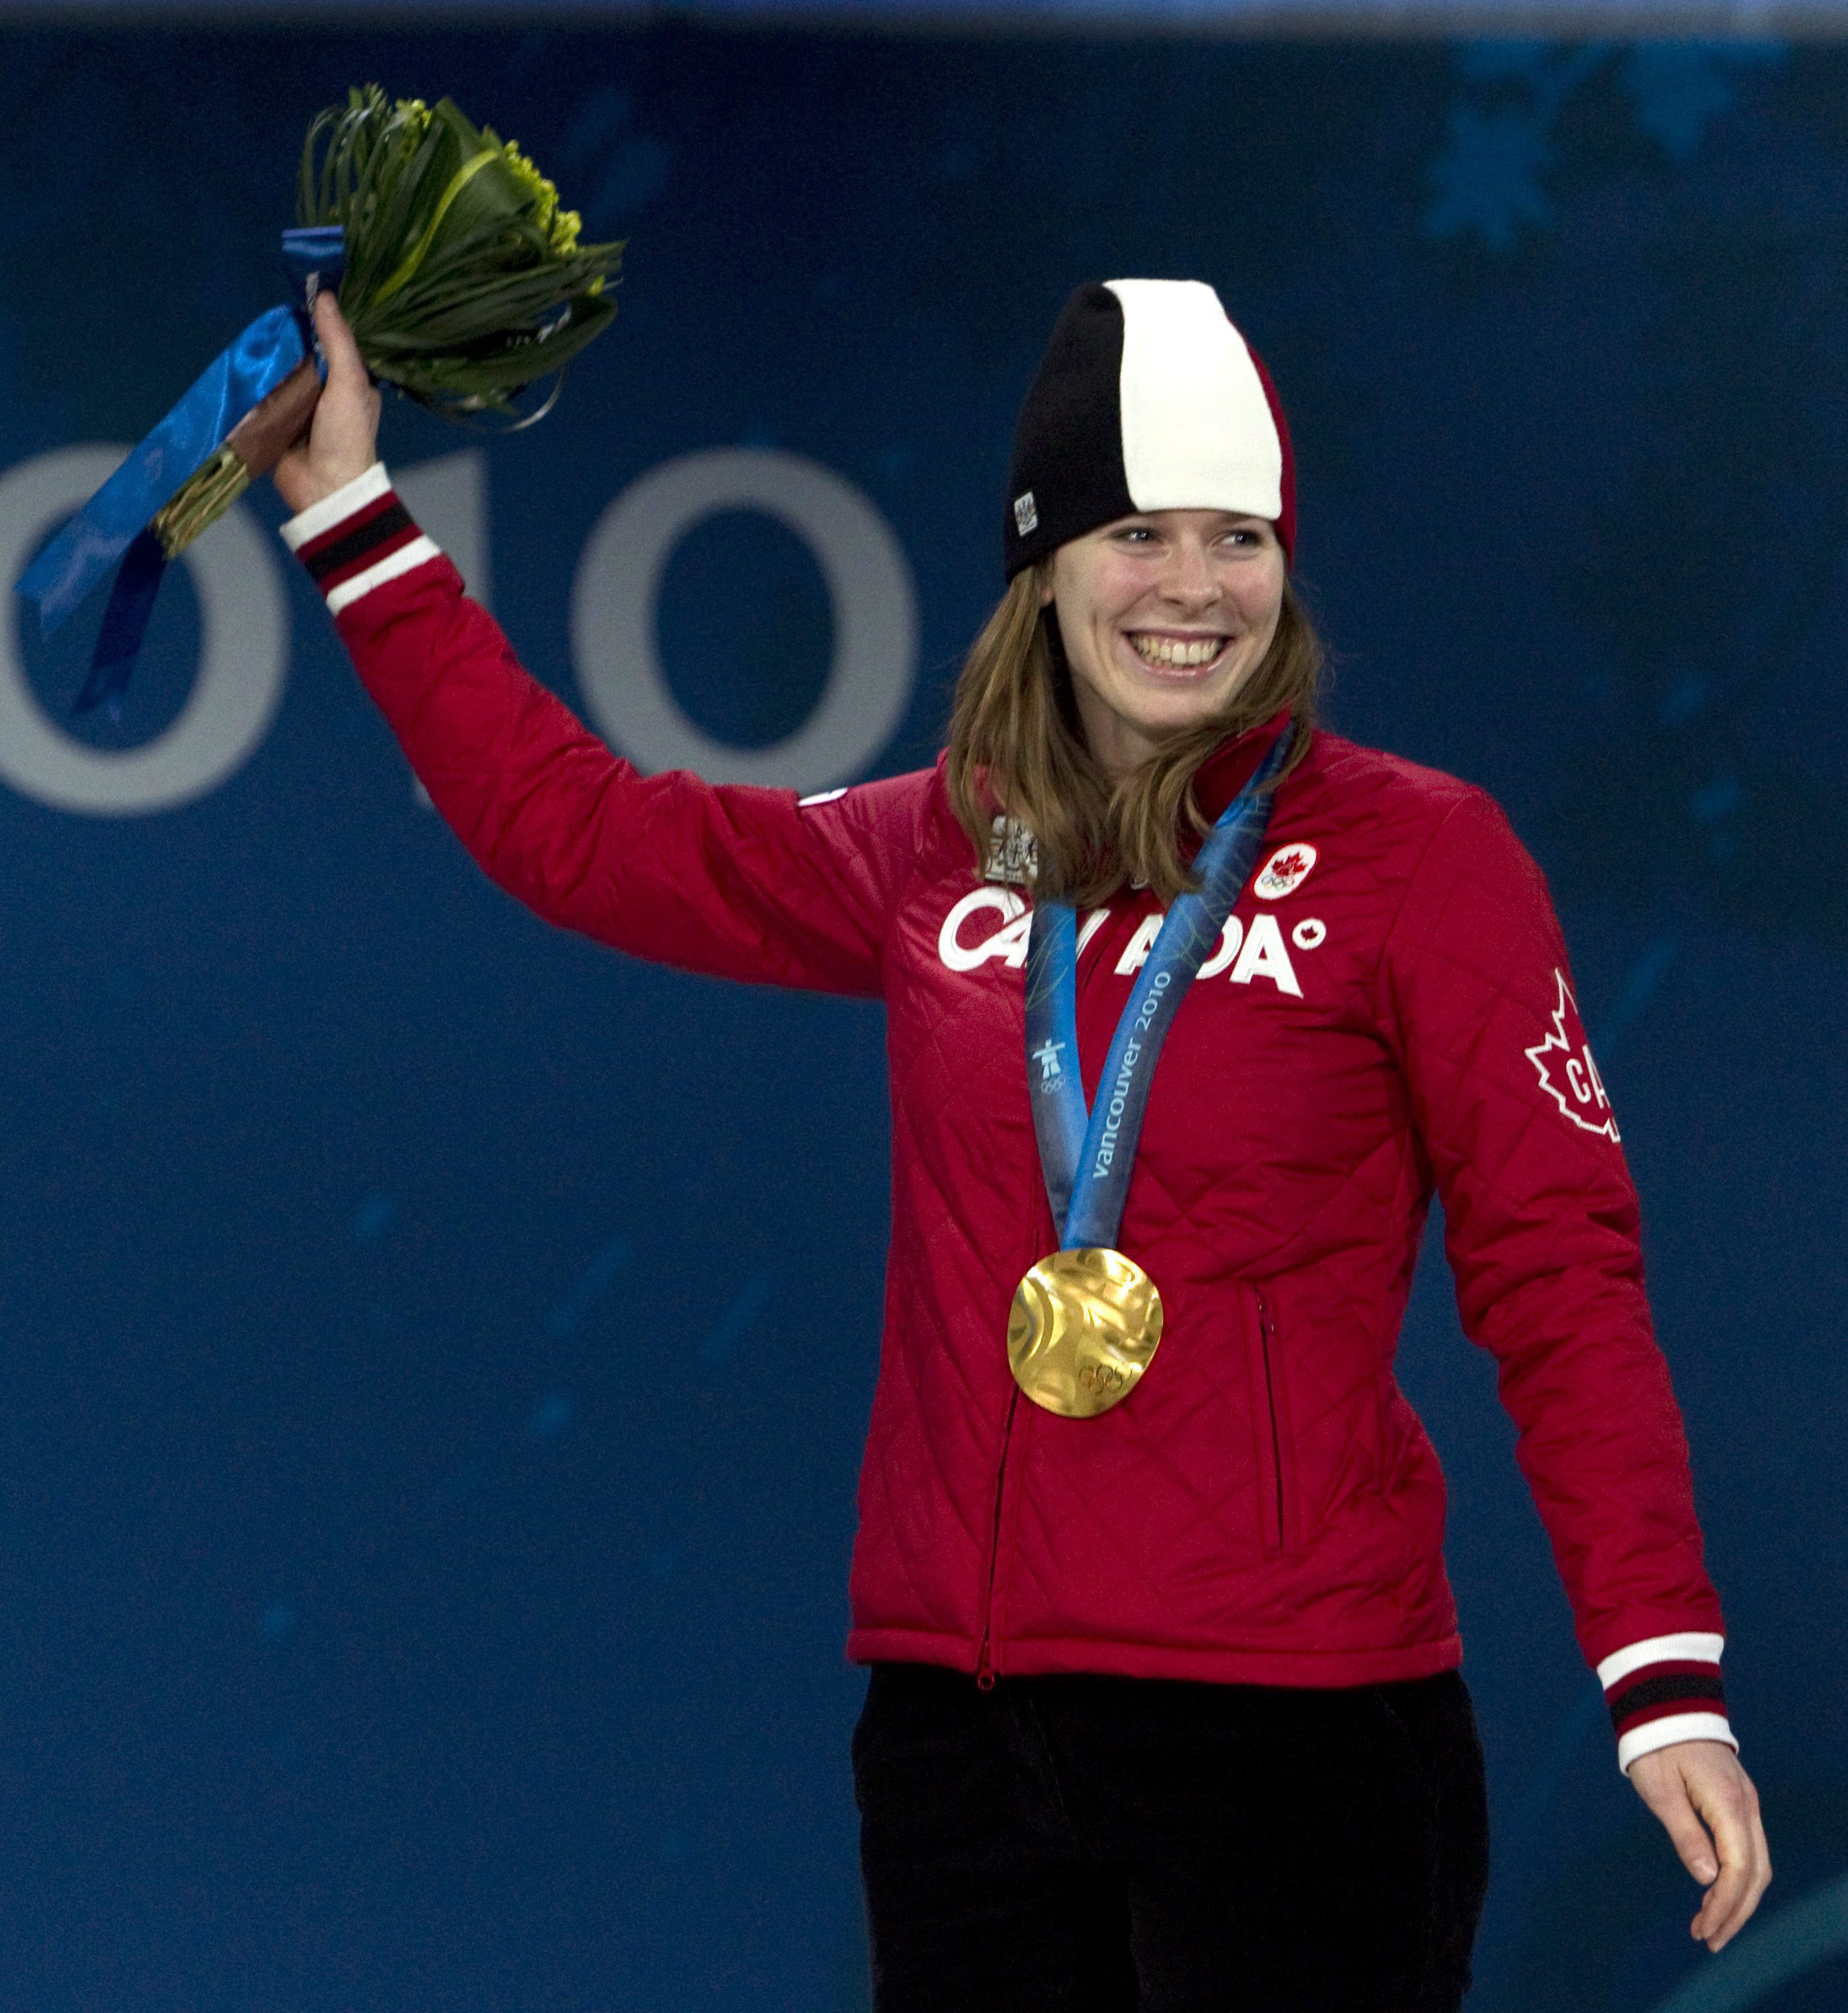 Vancouver 2010 Winter Olympics - Athletes, Medals & Results